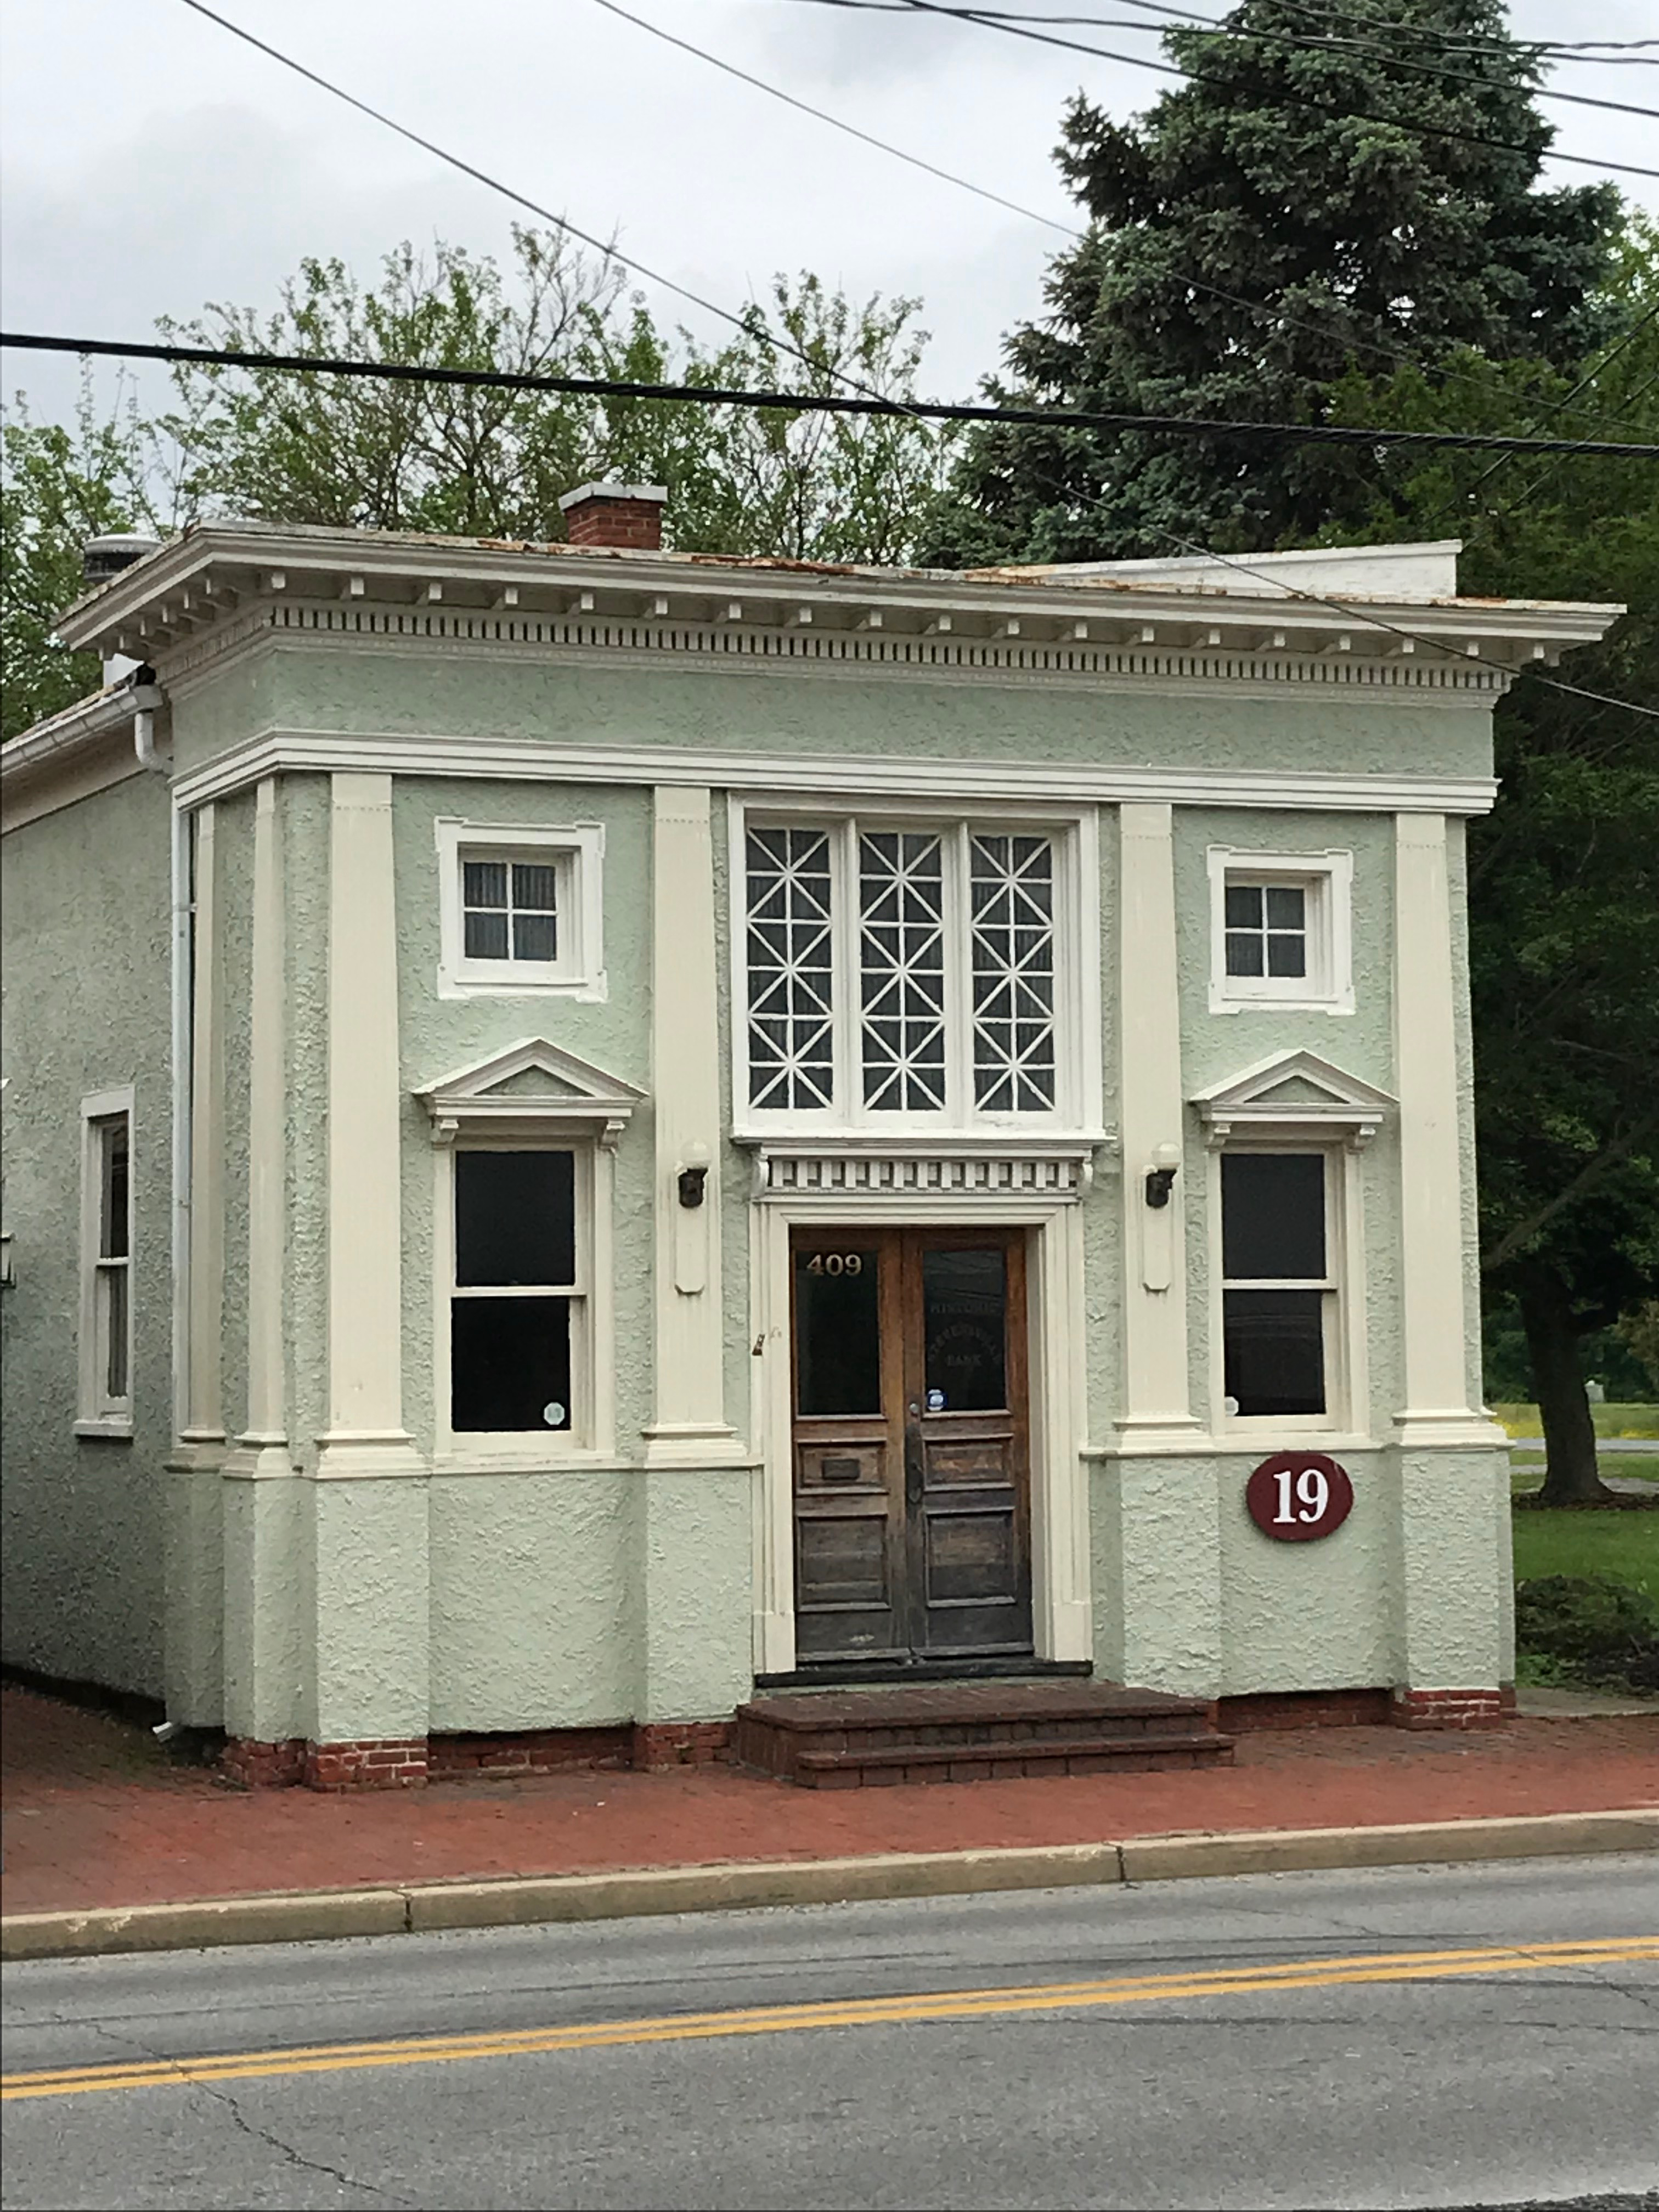 Street view of the Historic Stevensville Bank